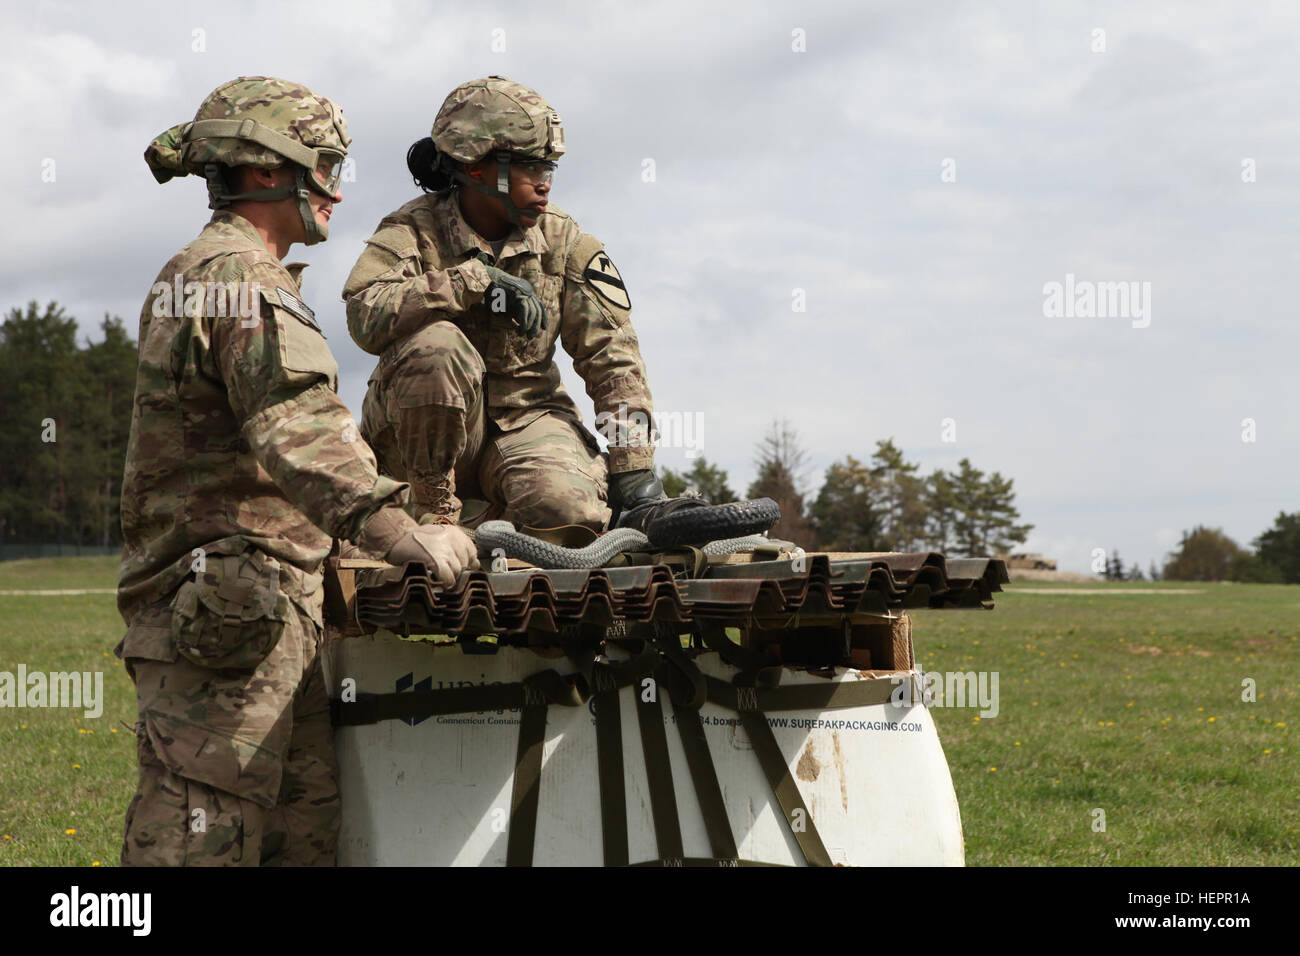 U.S. Soldiers of Charlie Company, 3rd Battalion, 227th Aviation Regiment 'Spearhead' observe an airstrip while conducting sling load operations during exercise Saber Junction 16 at the U.S. Army’s Joint Multinational Readiness Center (JMRC) in Hohenfels, Germany, April 13, 2016. Saber Junction 16 is the U.S. Army Europe’s 173rd Airborne Brigade’s combat training center certification exercise, taking place at the JMRC in Hohenfels, Germany, Mar. 31-Apr. 24, 2016.  The exercise is designed to evaluate the readiness of the Army’s Europe-based combat brigades to conduct unified land operations and Stock Photo